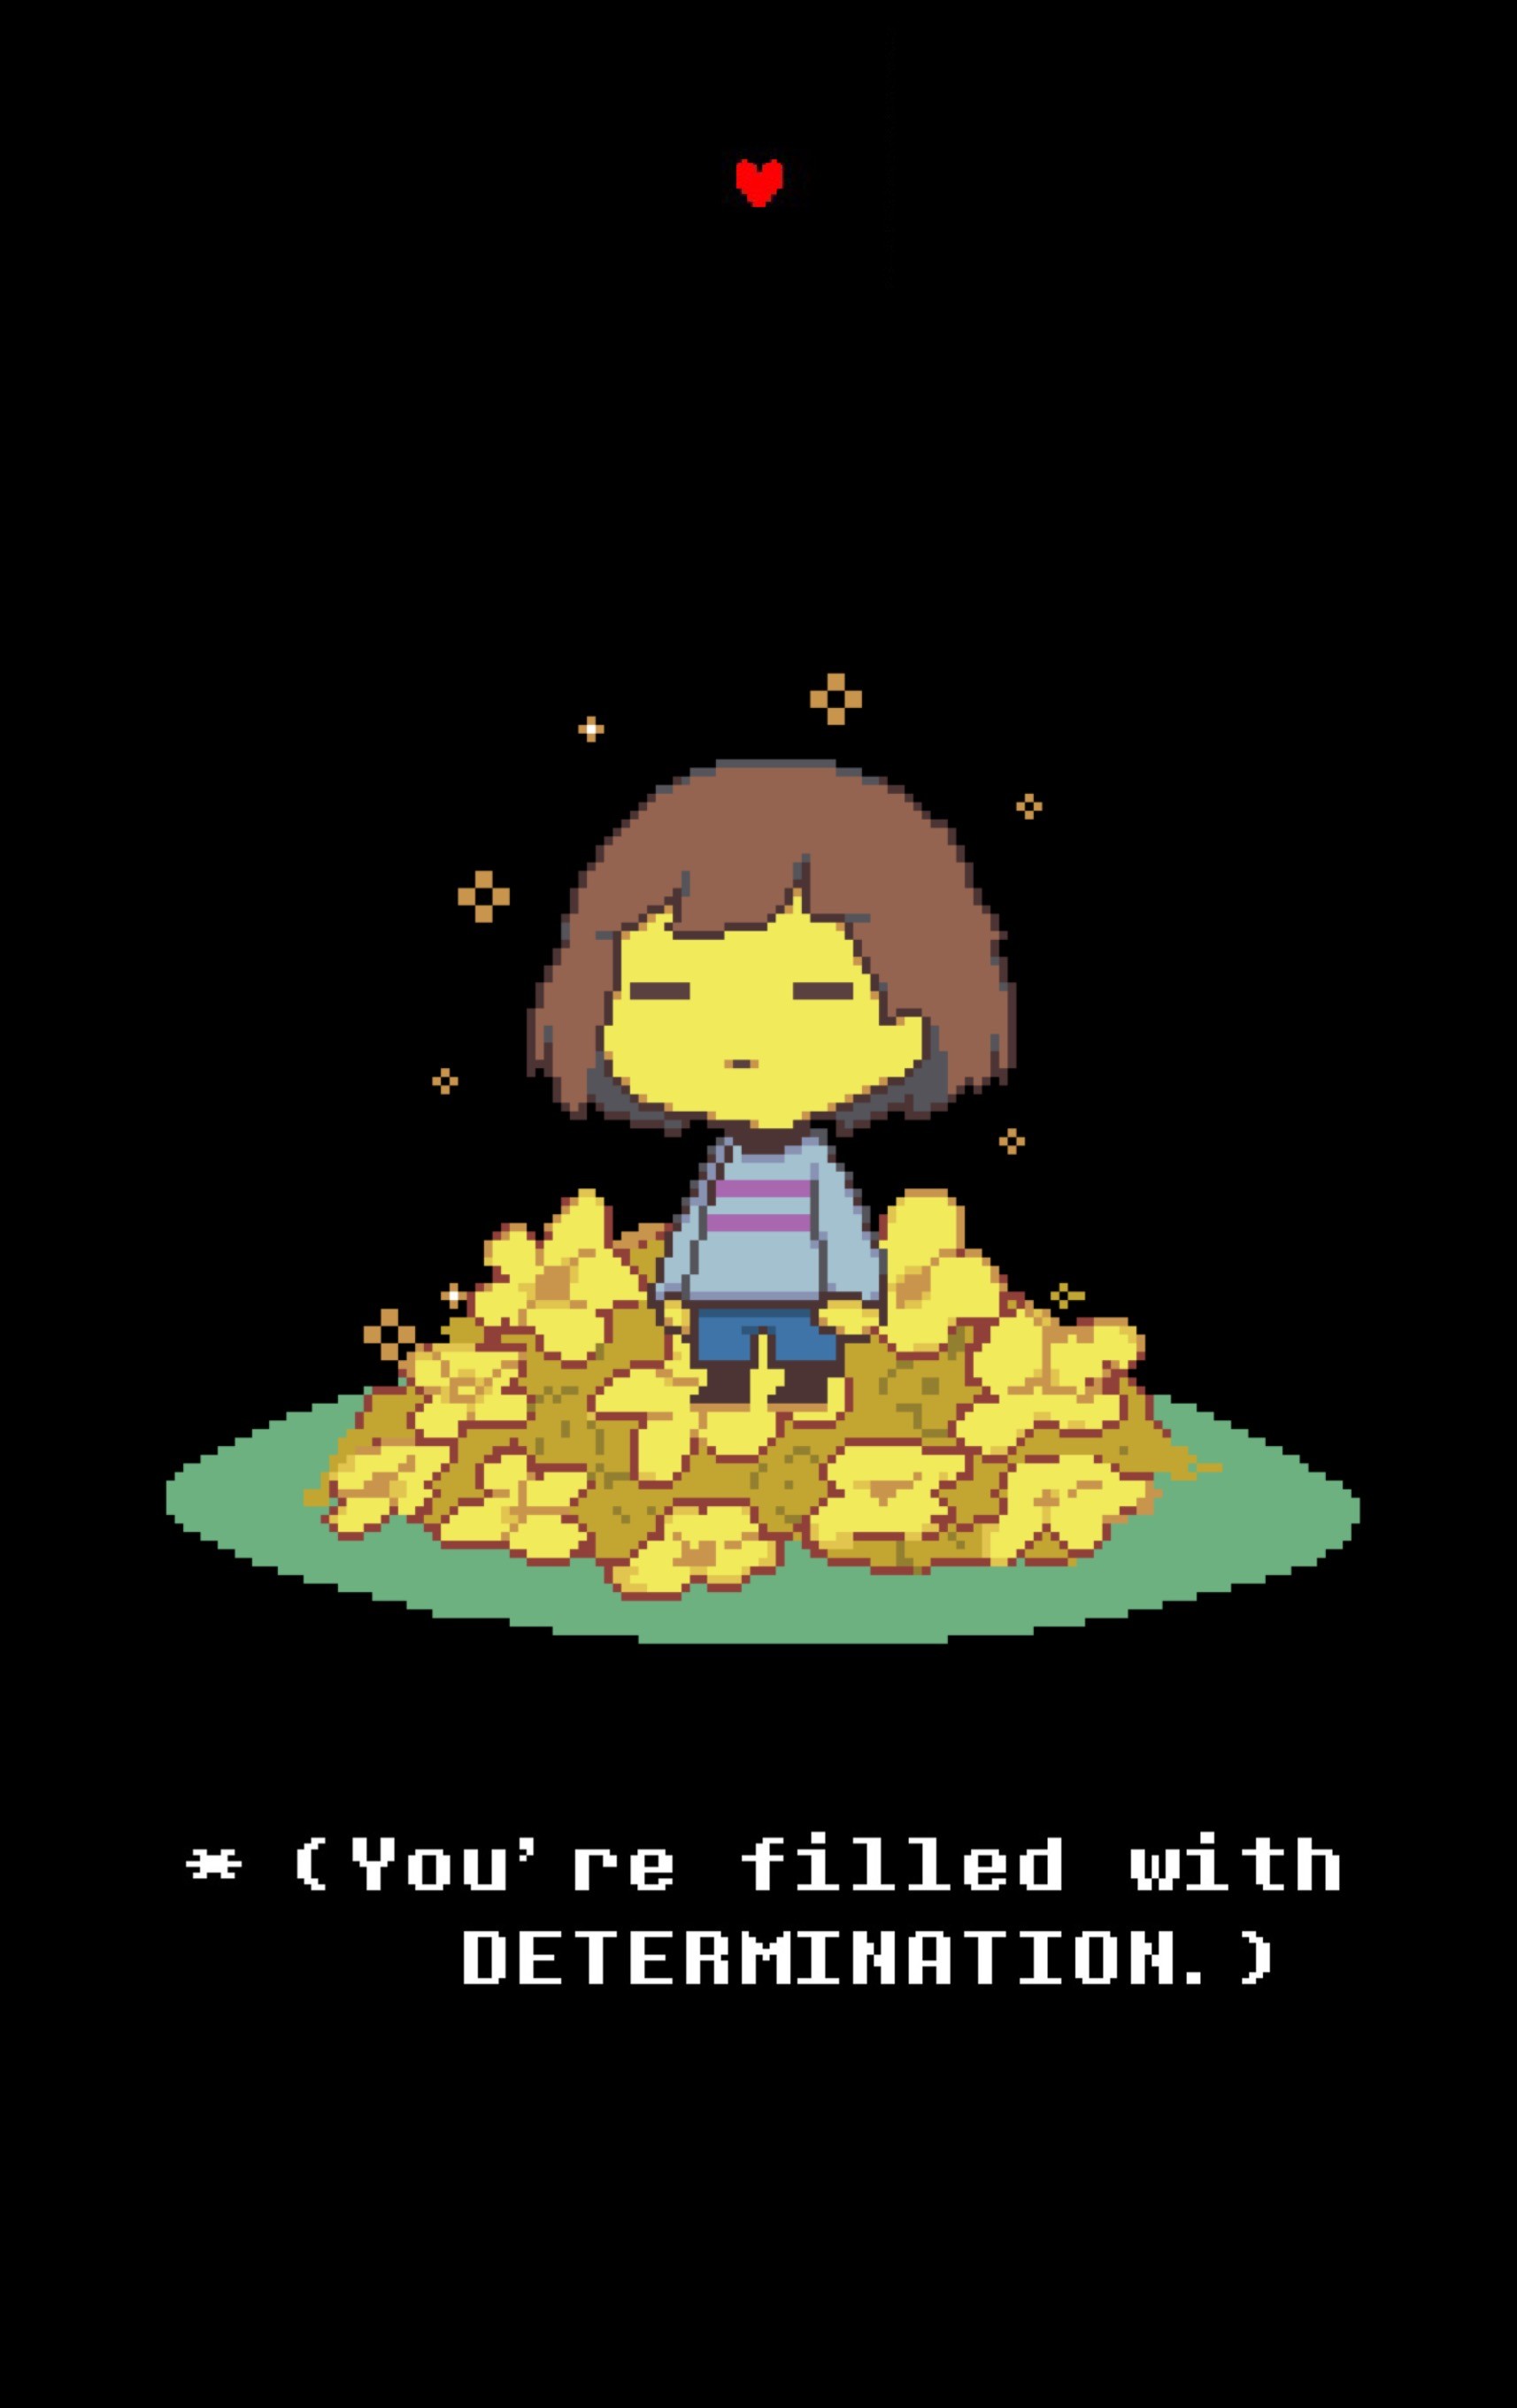 1714x2721 My Undertale iPhone wallpaper! (Credits to boorim on Deviantart for the  lovely Frisk pixel art)